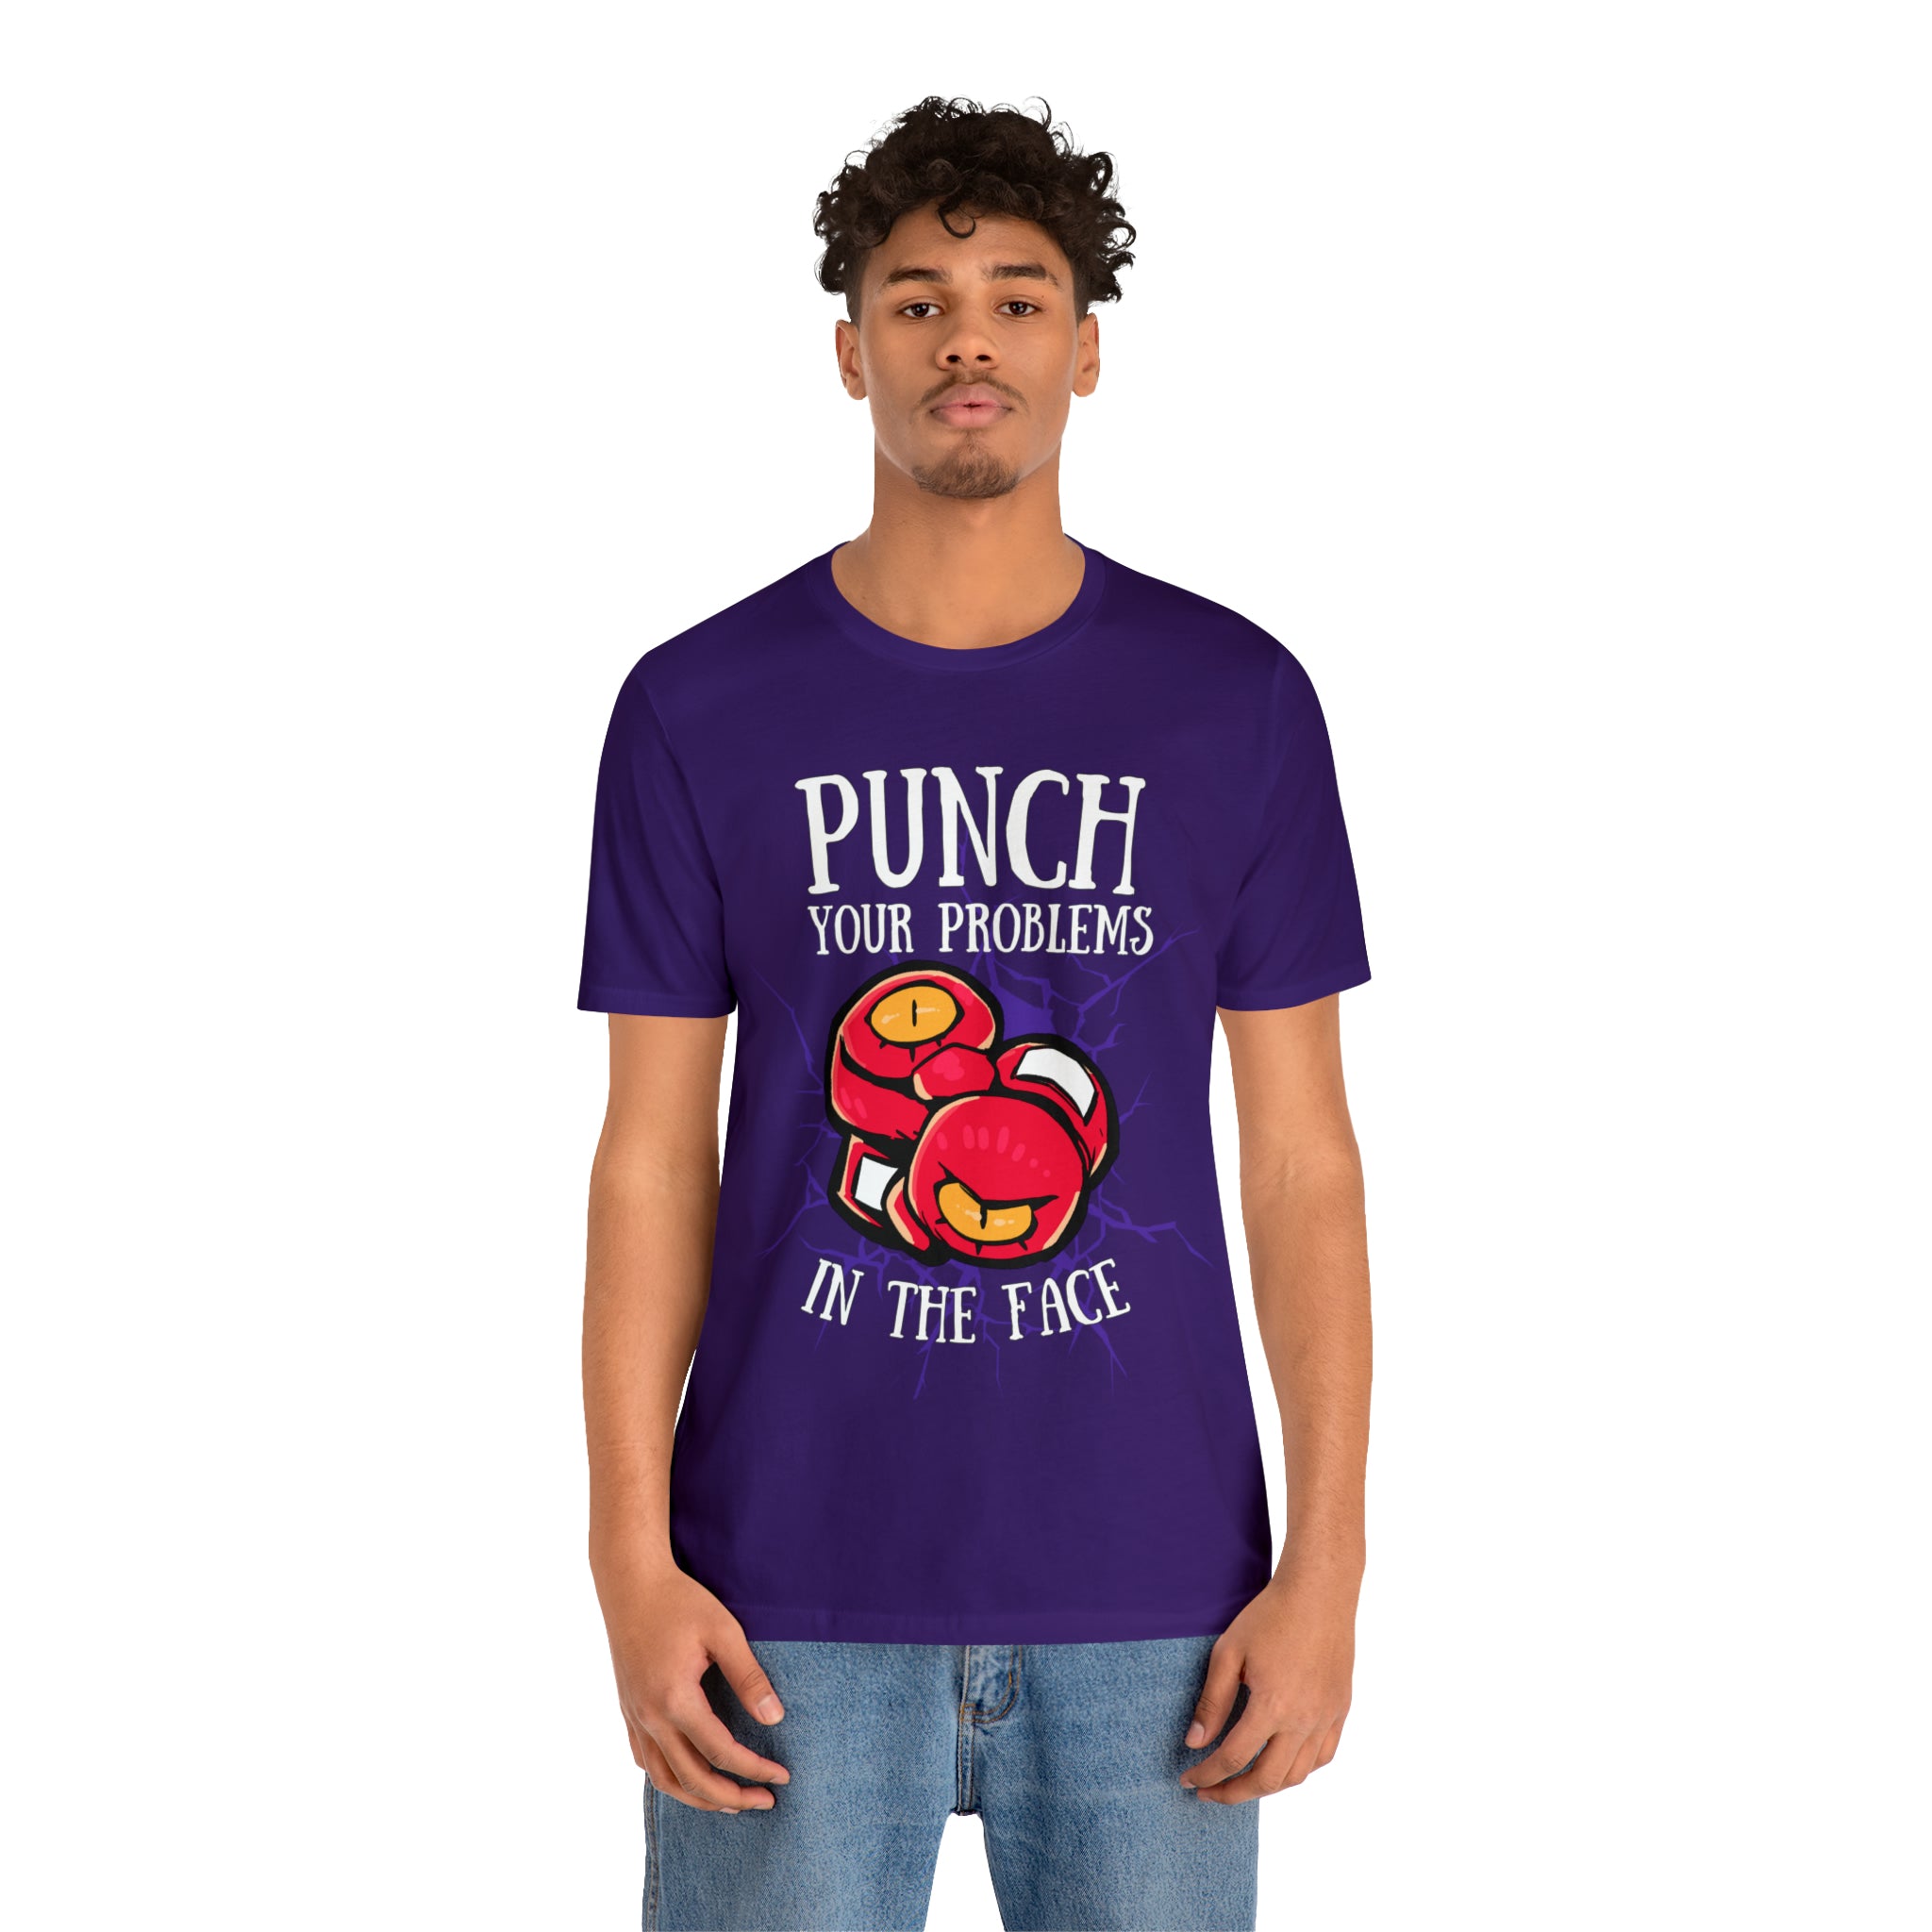 Punch Your Problems Tee